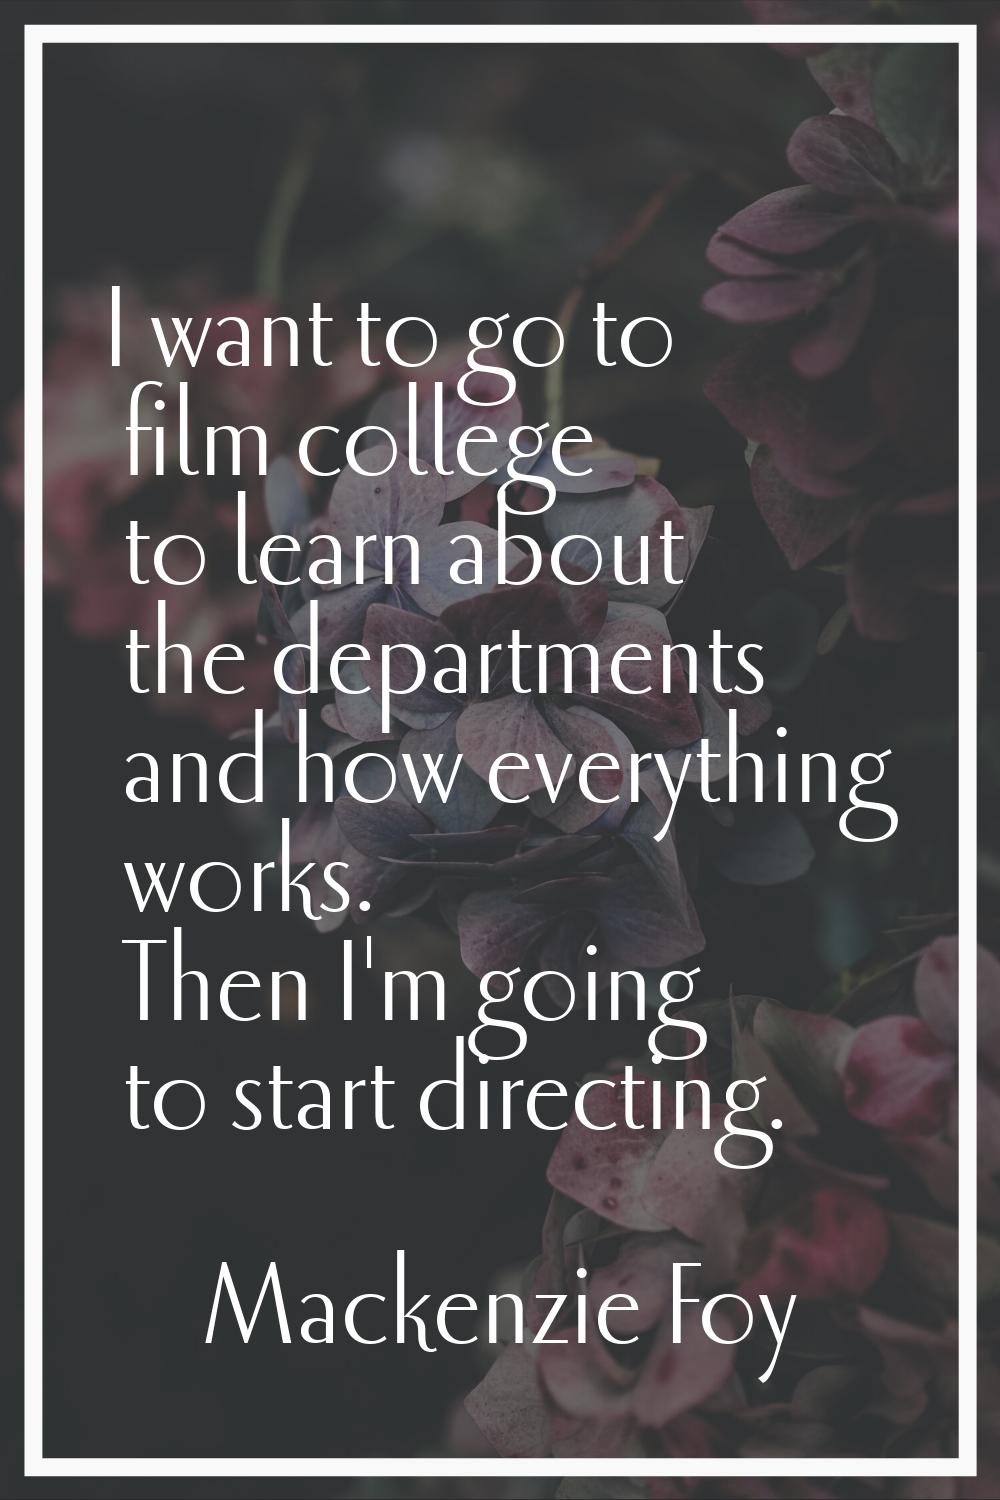 I want to go to film college to learn about the departments and how everything works. Then I'm goin